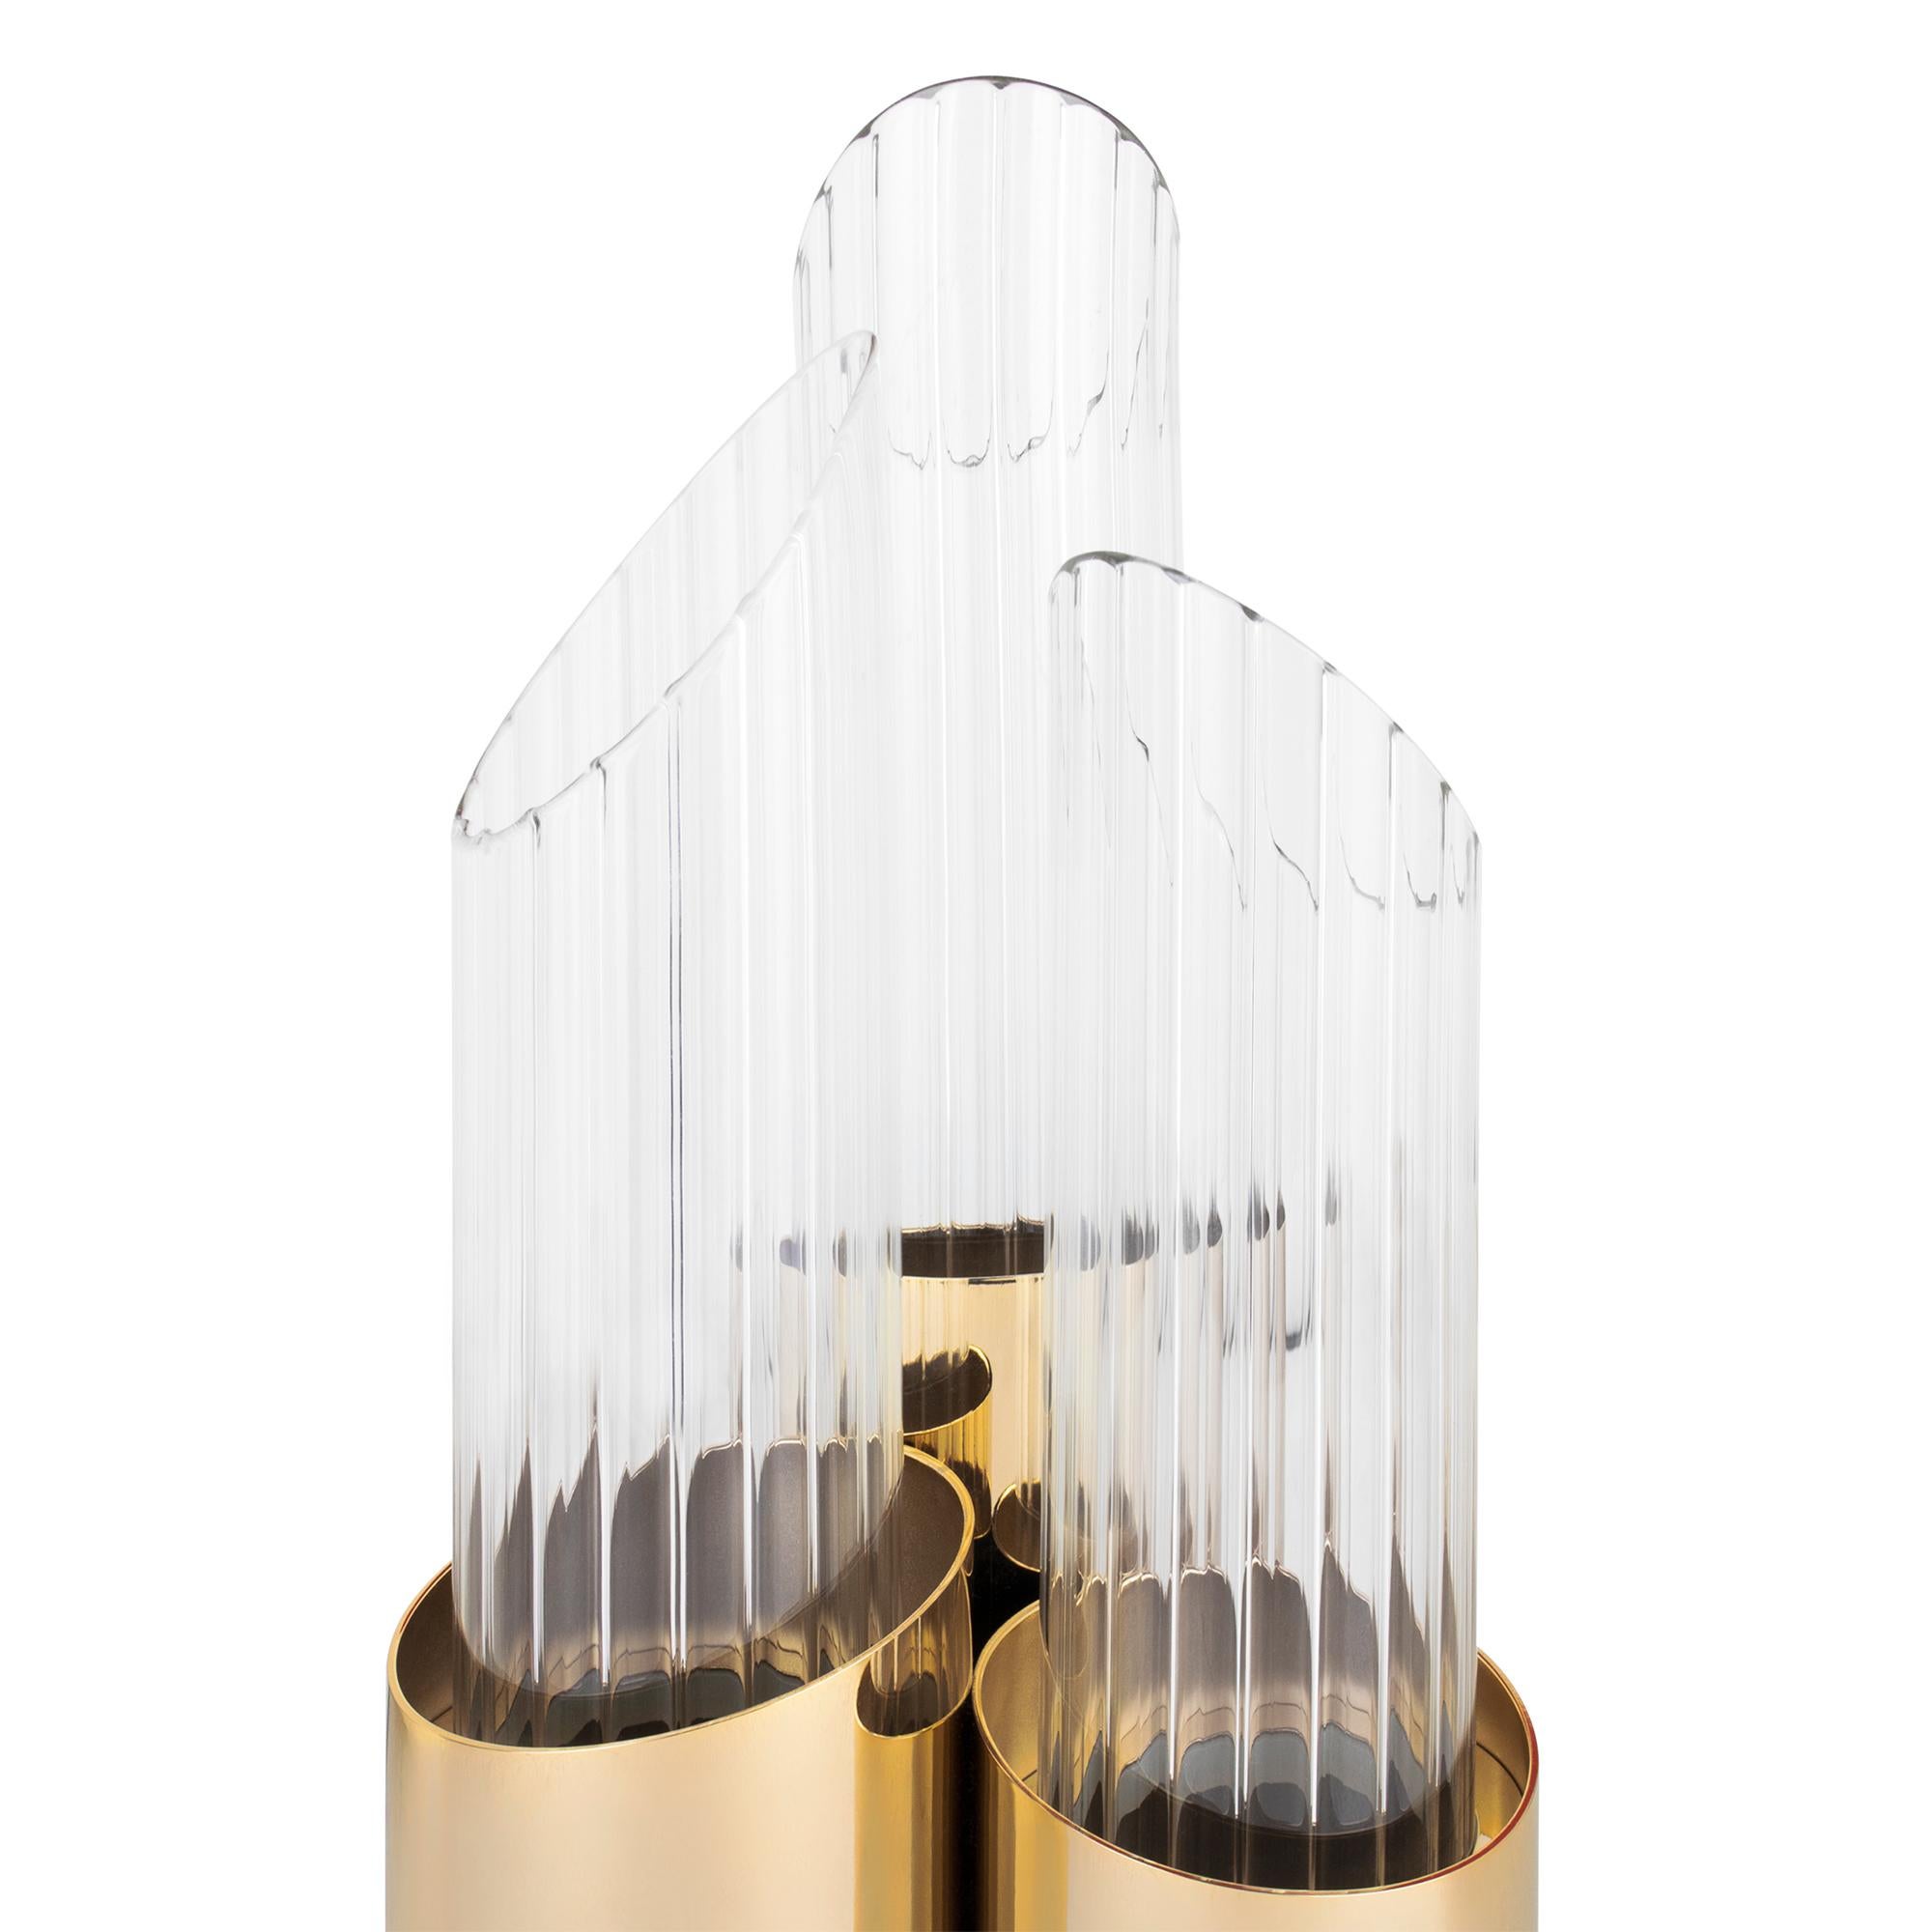 Table Lamp Vitta with structure in gold-plated
polished brass and with crystal glass lamp shades.
With 3 bulbs, lamp holder type G9, halogen bulb,
max 40watts. Voltage 220-240V. Bulbs not included.
  